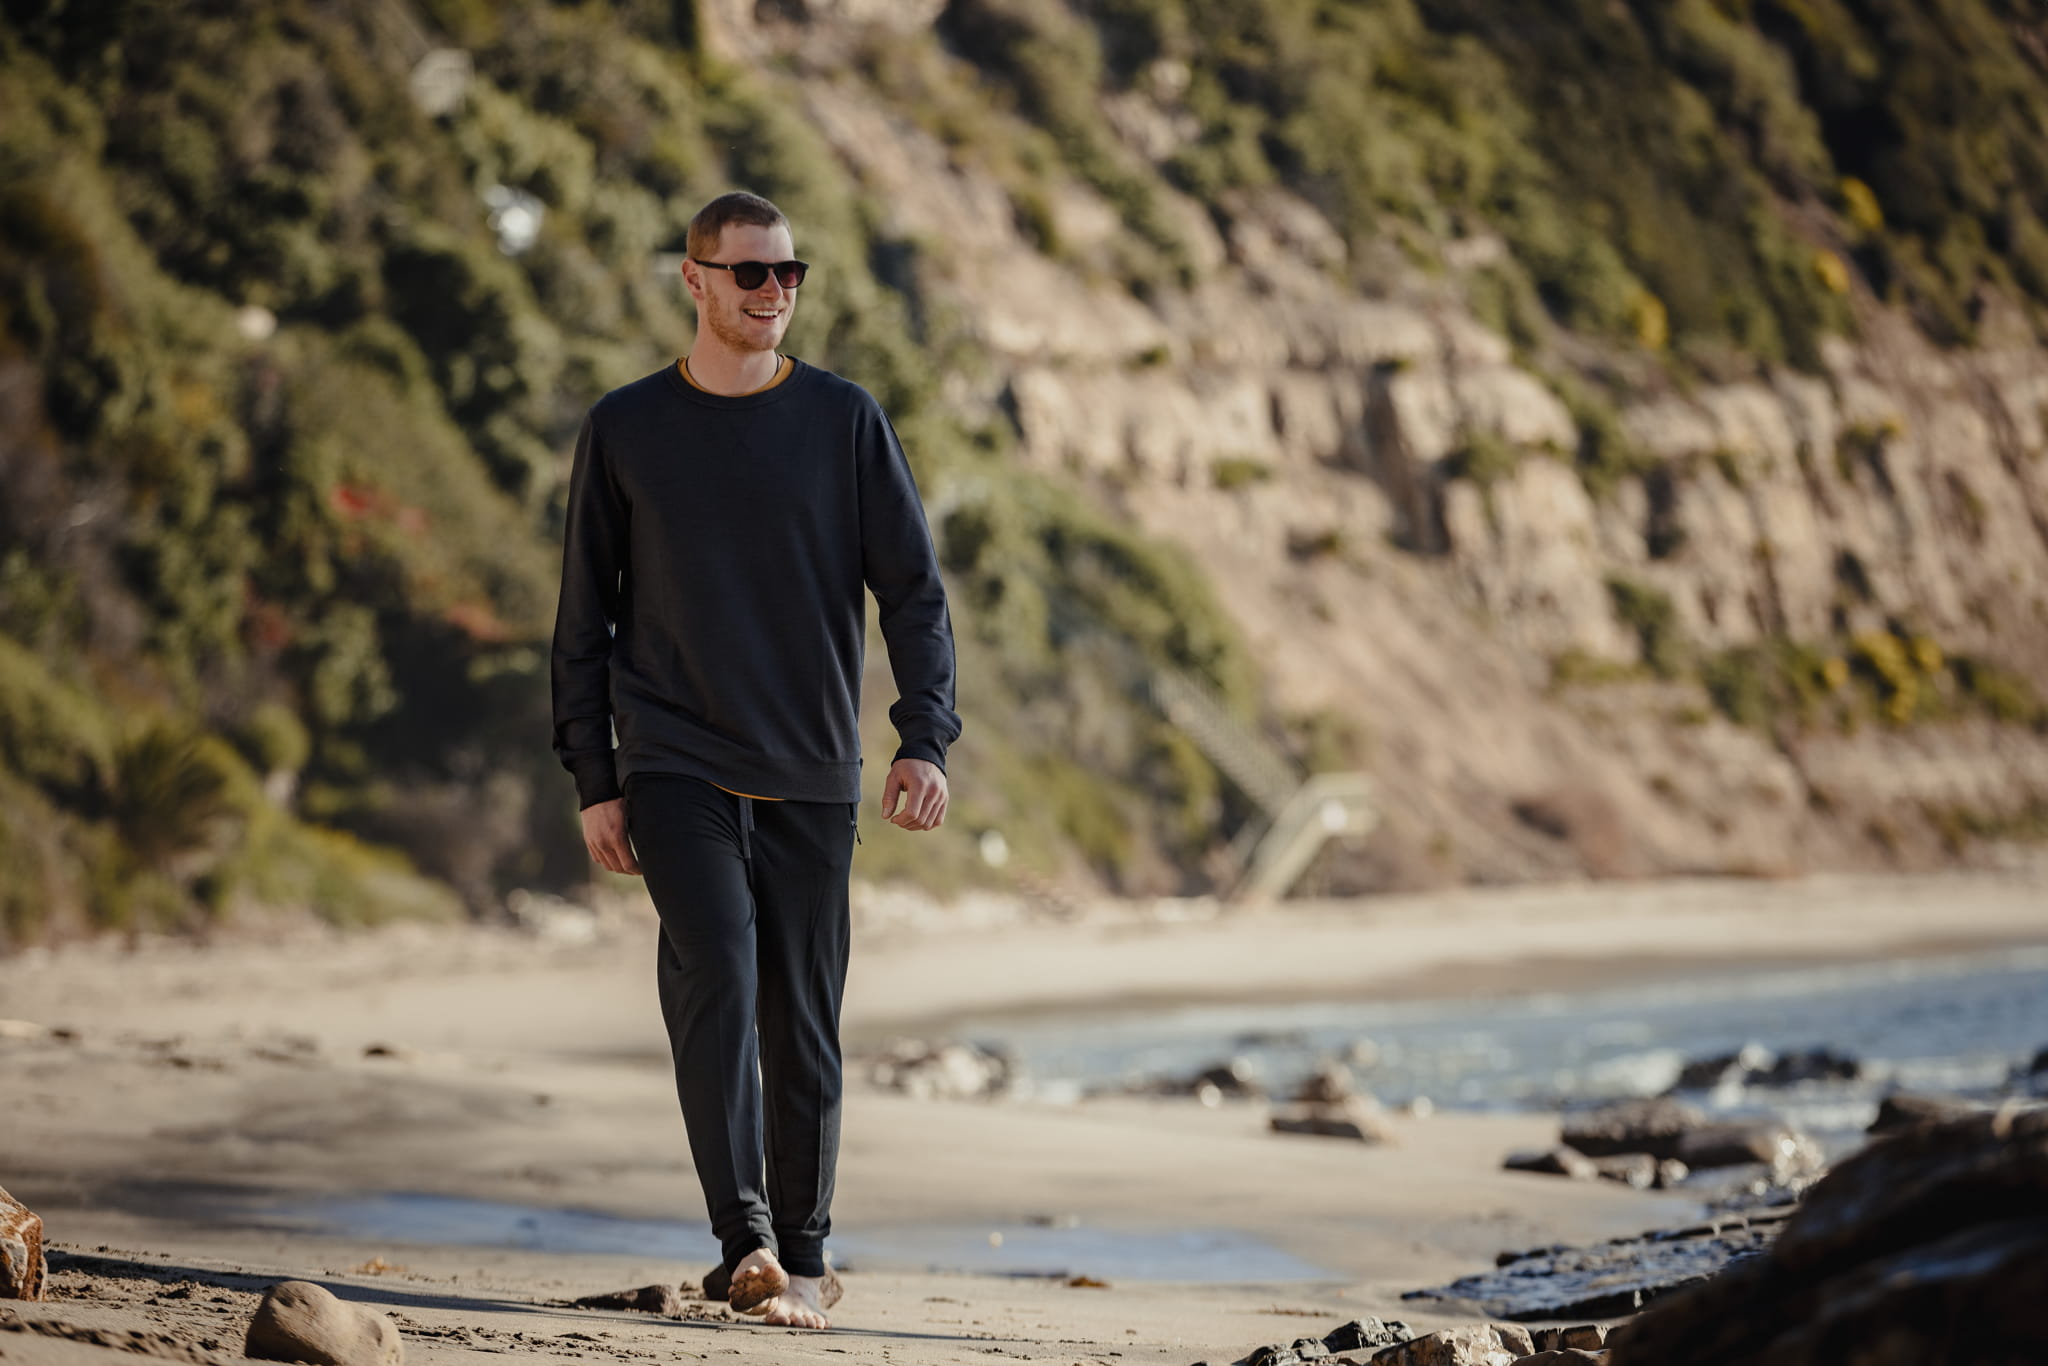 Hyde Joggers make great clothing for traveling and long walks on the beach